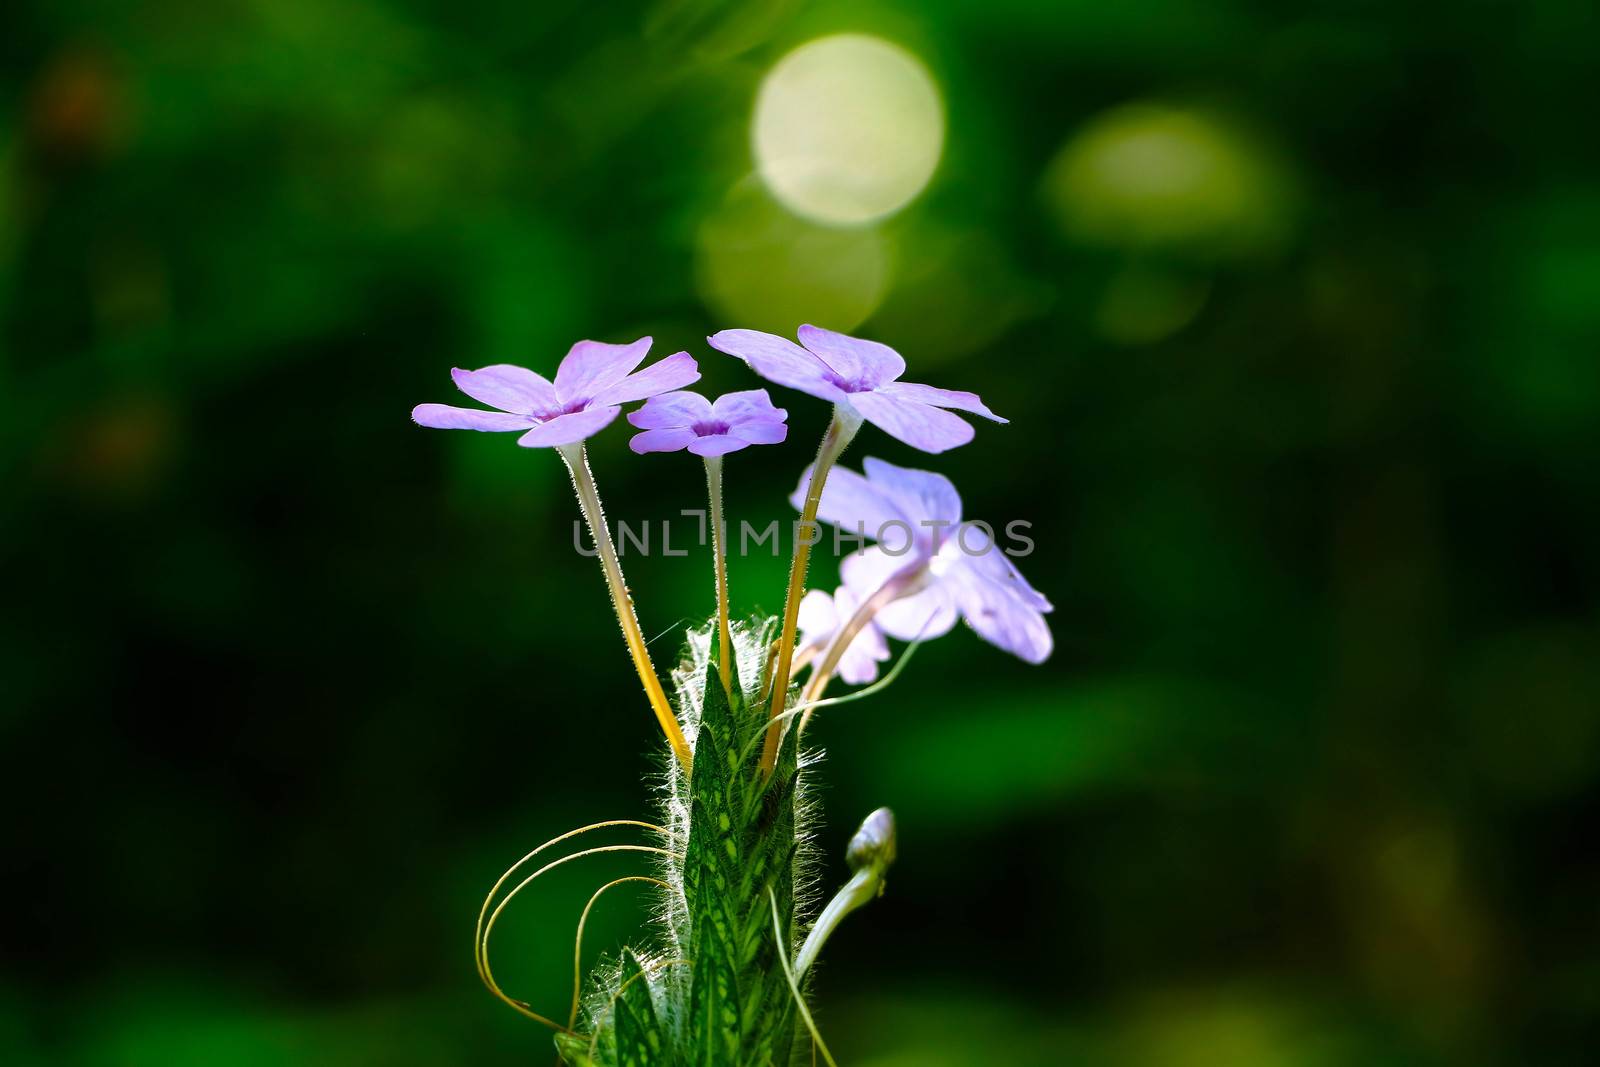 The Small violet flowers with the green nature by e22xua